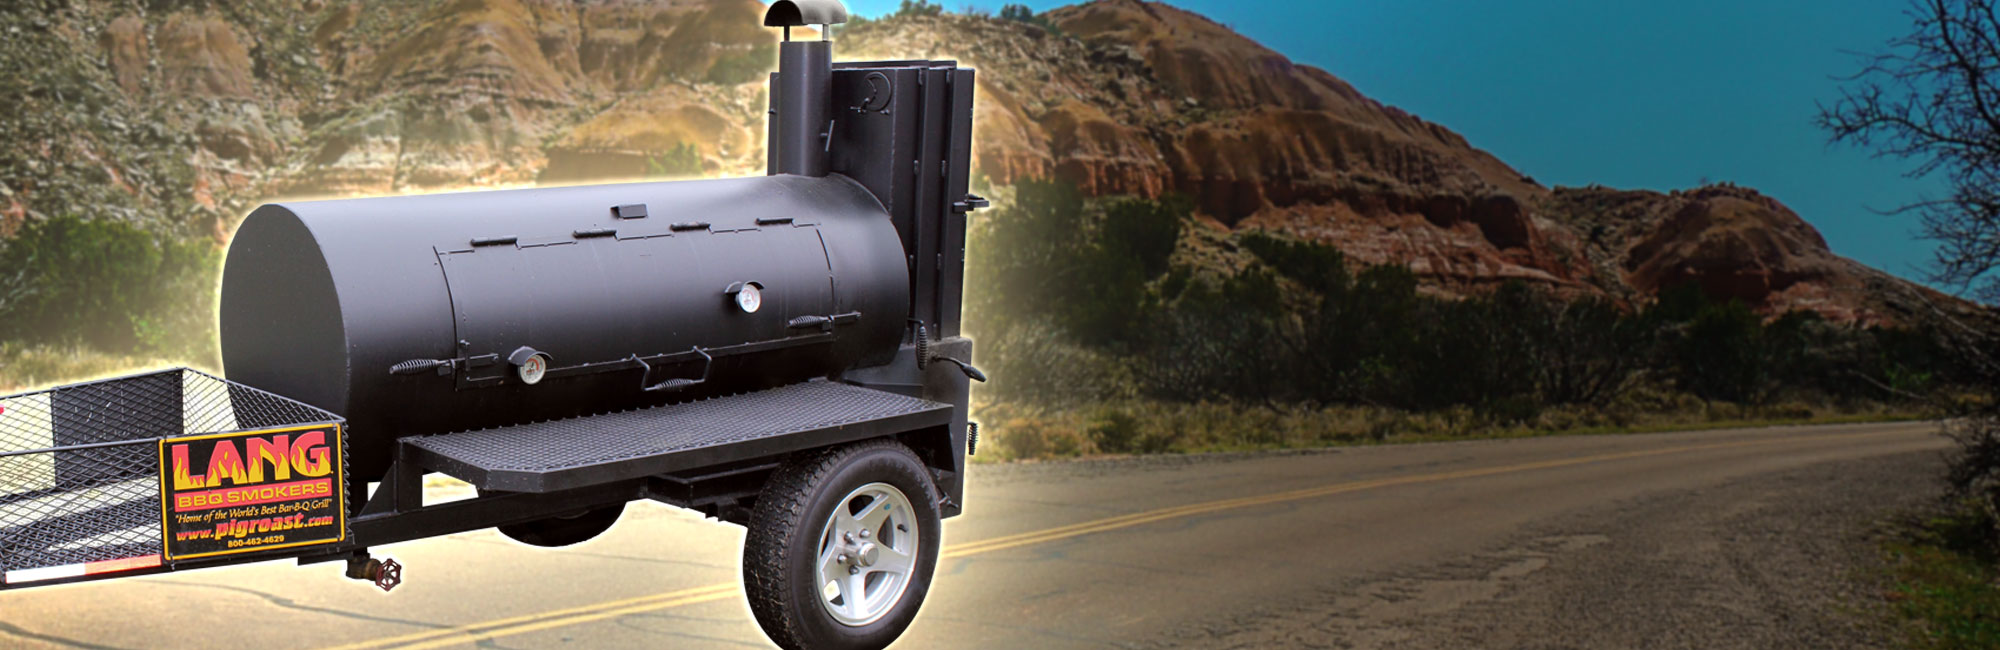 Commercial Smoker Cooker Models - Lang BBQ Smokers